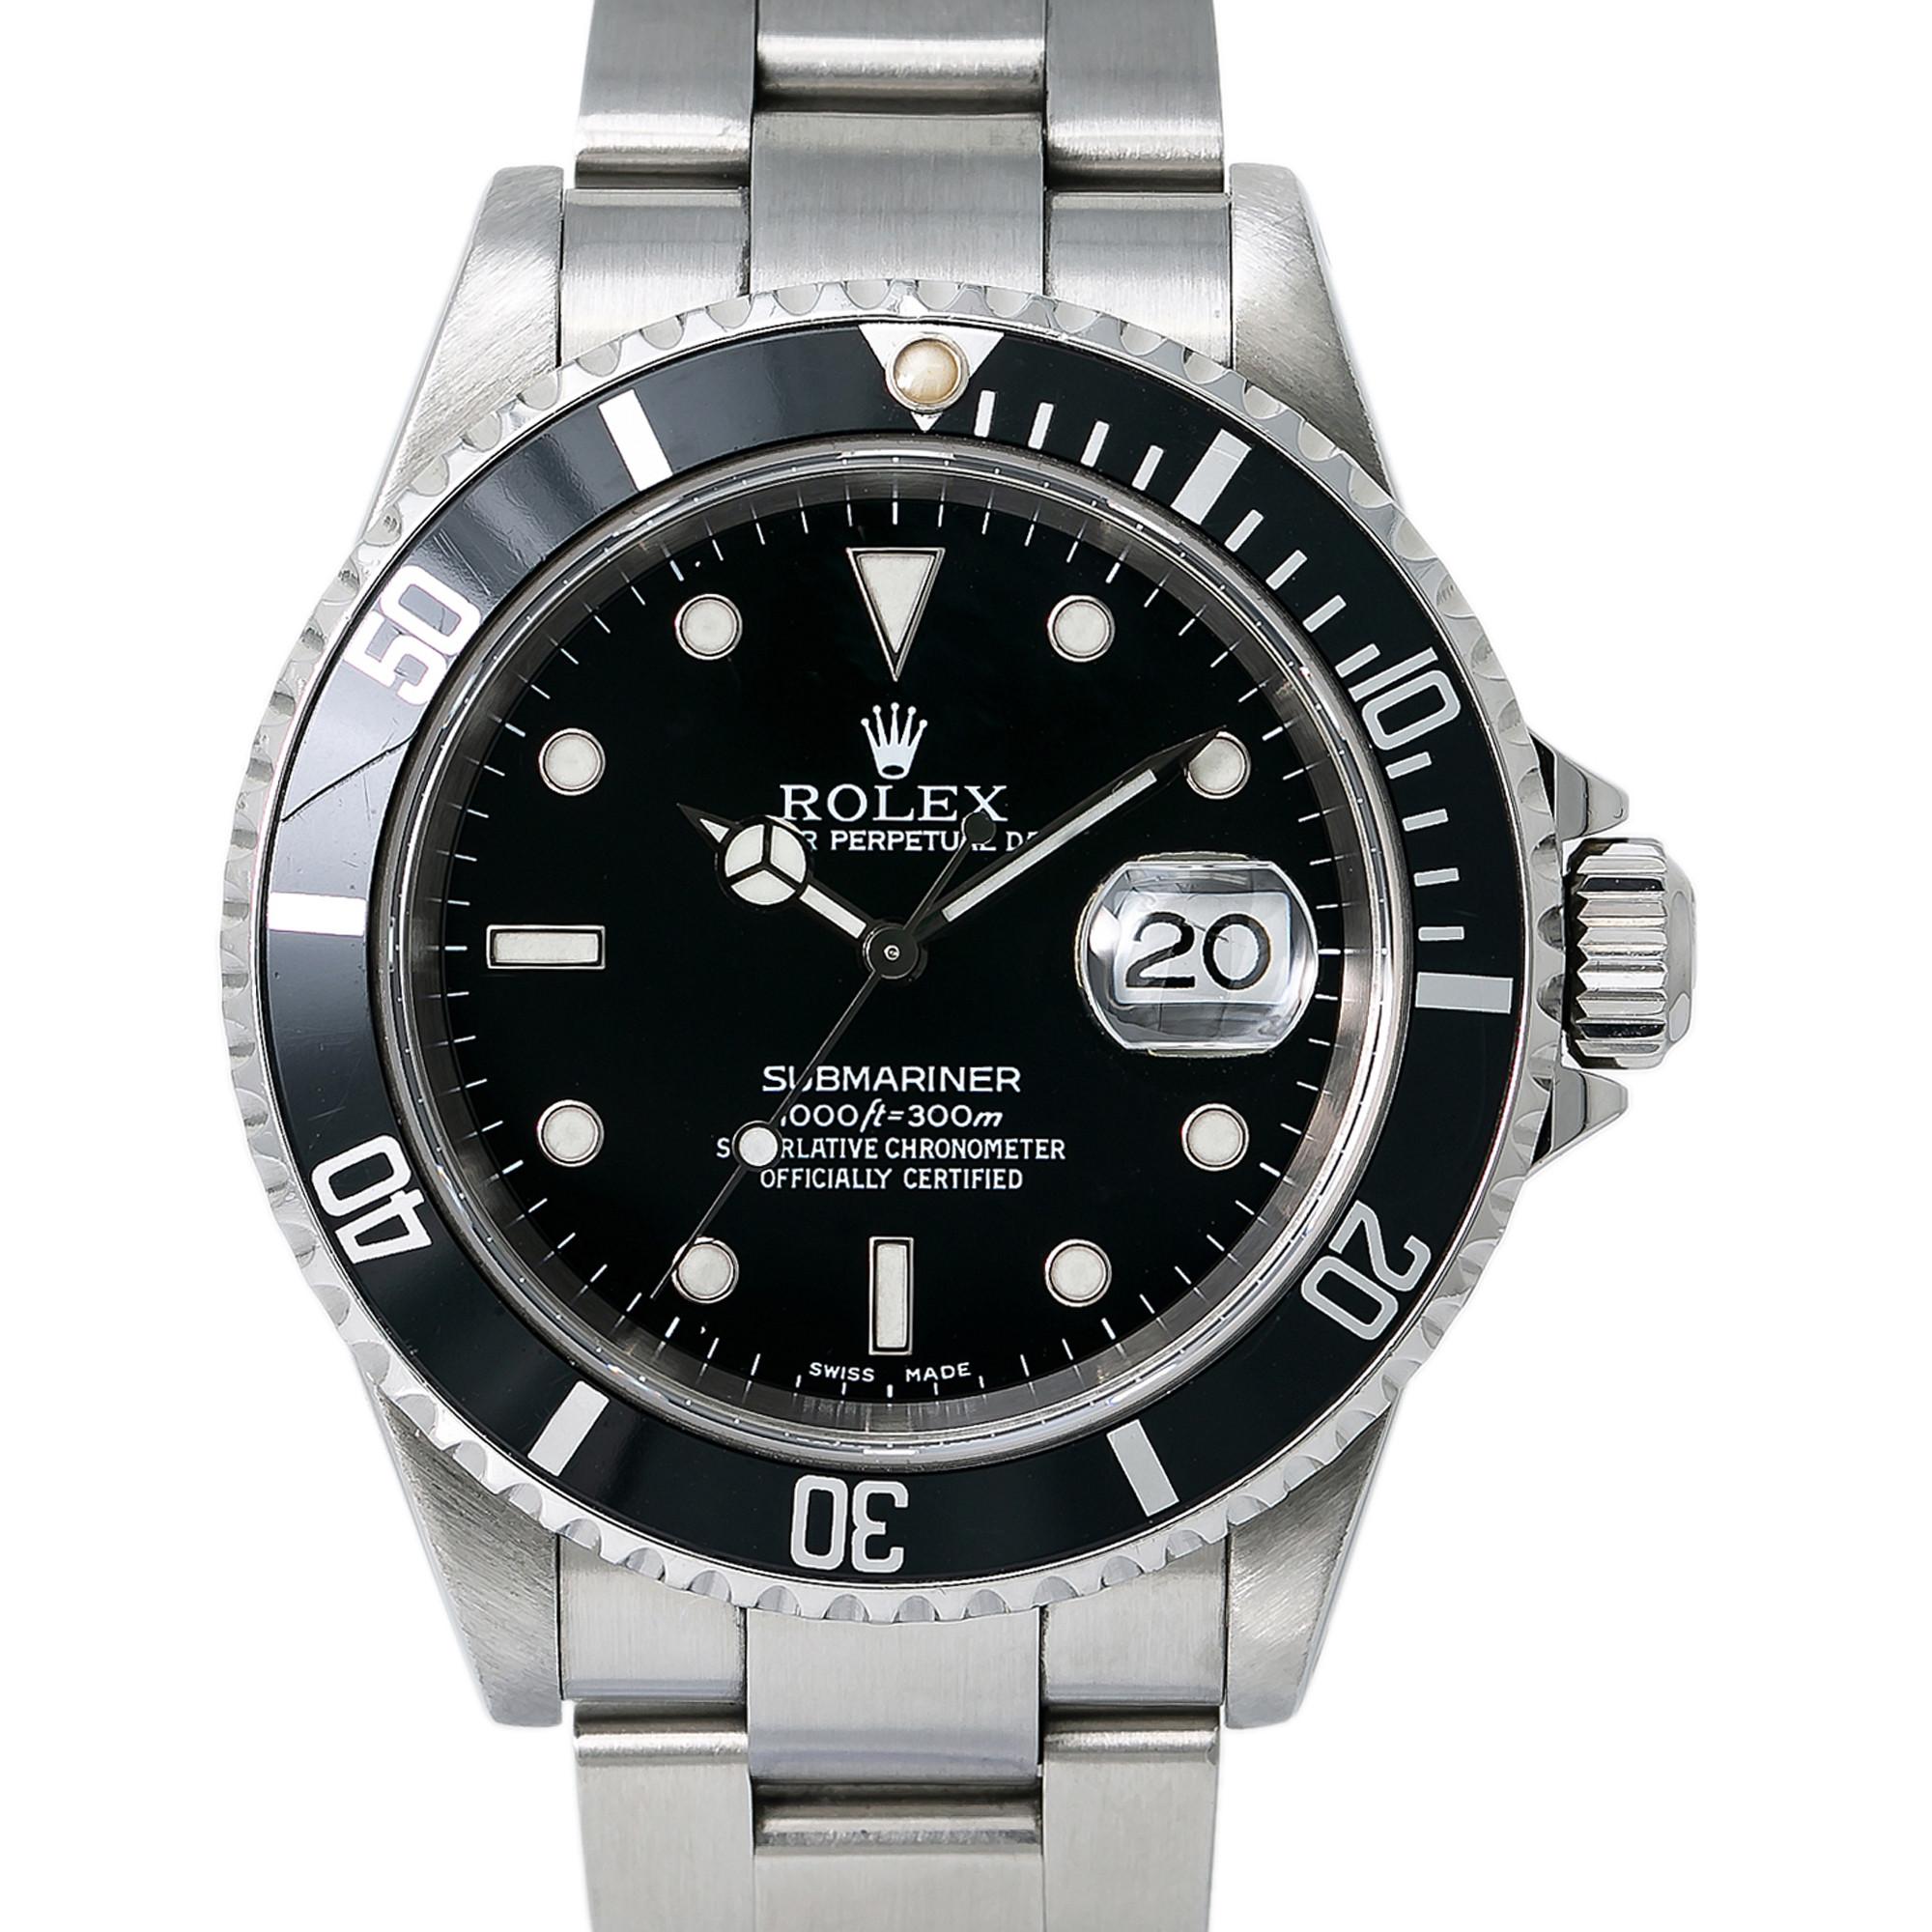 Contemporary Rolex Submariner 16610, Black Dial, Certified and Warranty